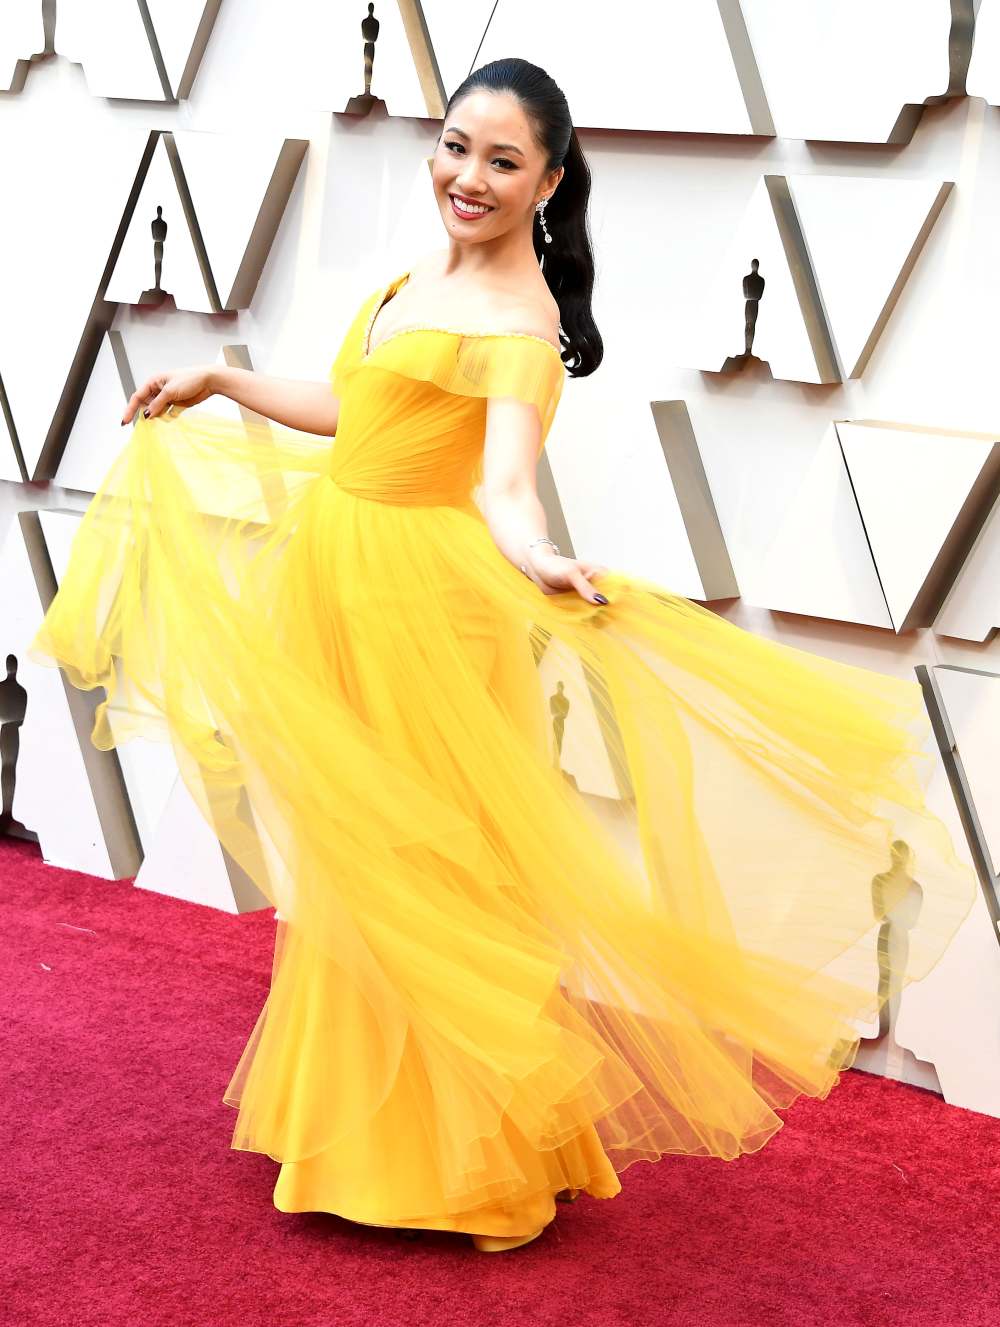 Coldplay's Song 'Yellow' Was Part of the Inspiration Behind Constance Wu's Oscar Dress